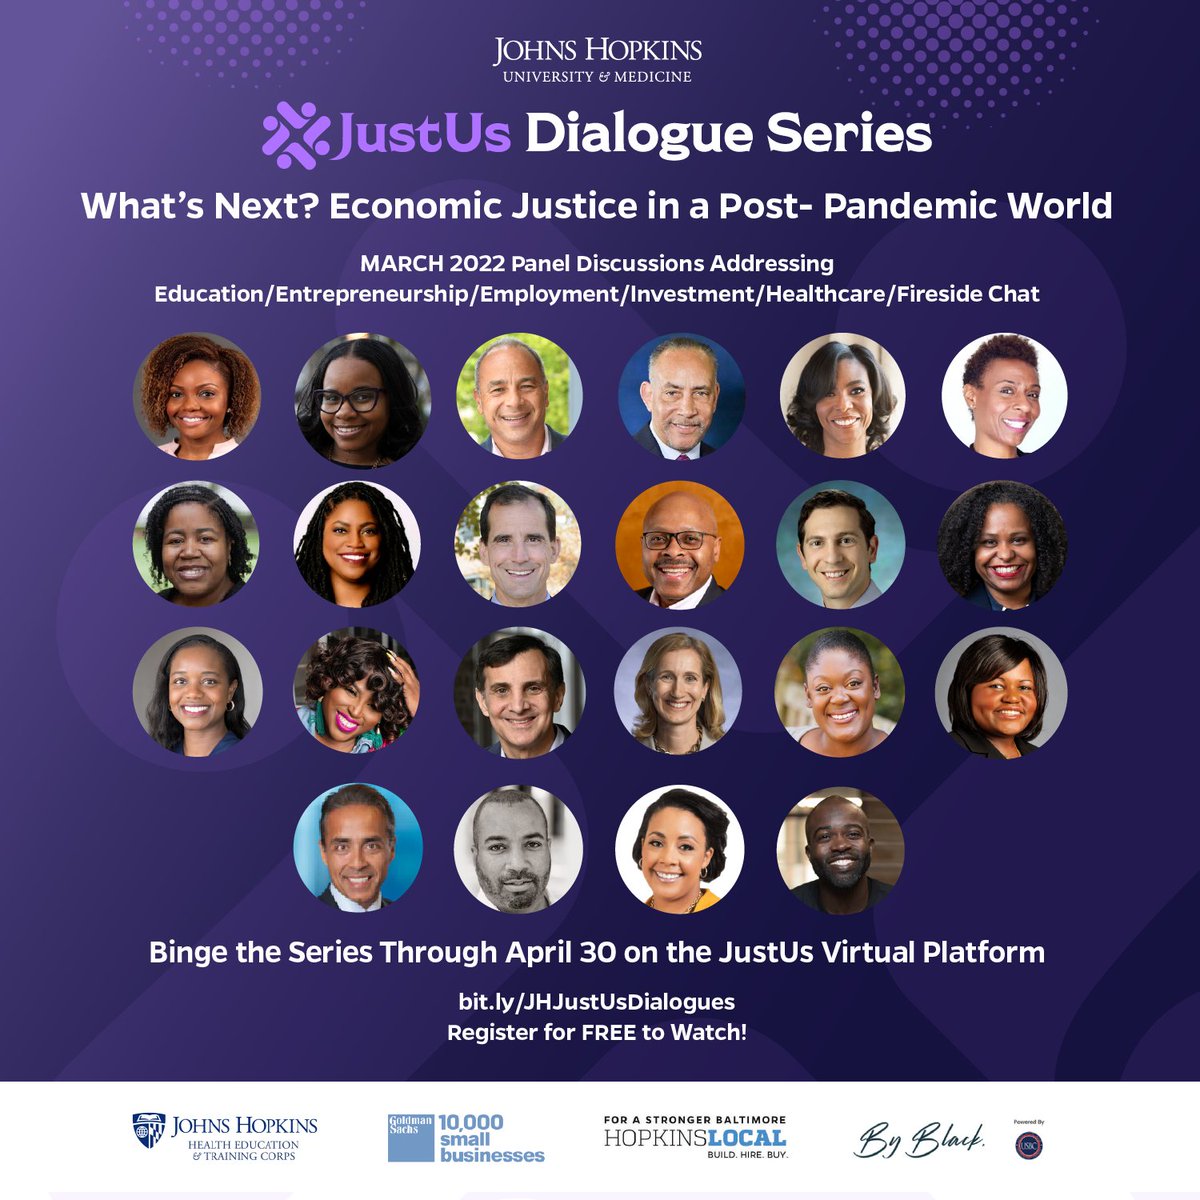 Did you miss the JustUs Dialogue Series? Watch the replays for FREE on the virtual platform until Saturday, April 30! 

Once you enter the lobby click on the panel graphic to watch - bit.ly/JHJustUsDialog…. 

Share your feedback with the team via email – JHConnects@jhu.edu.